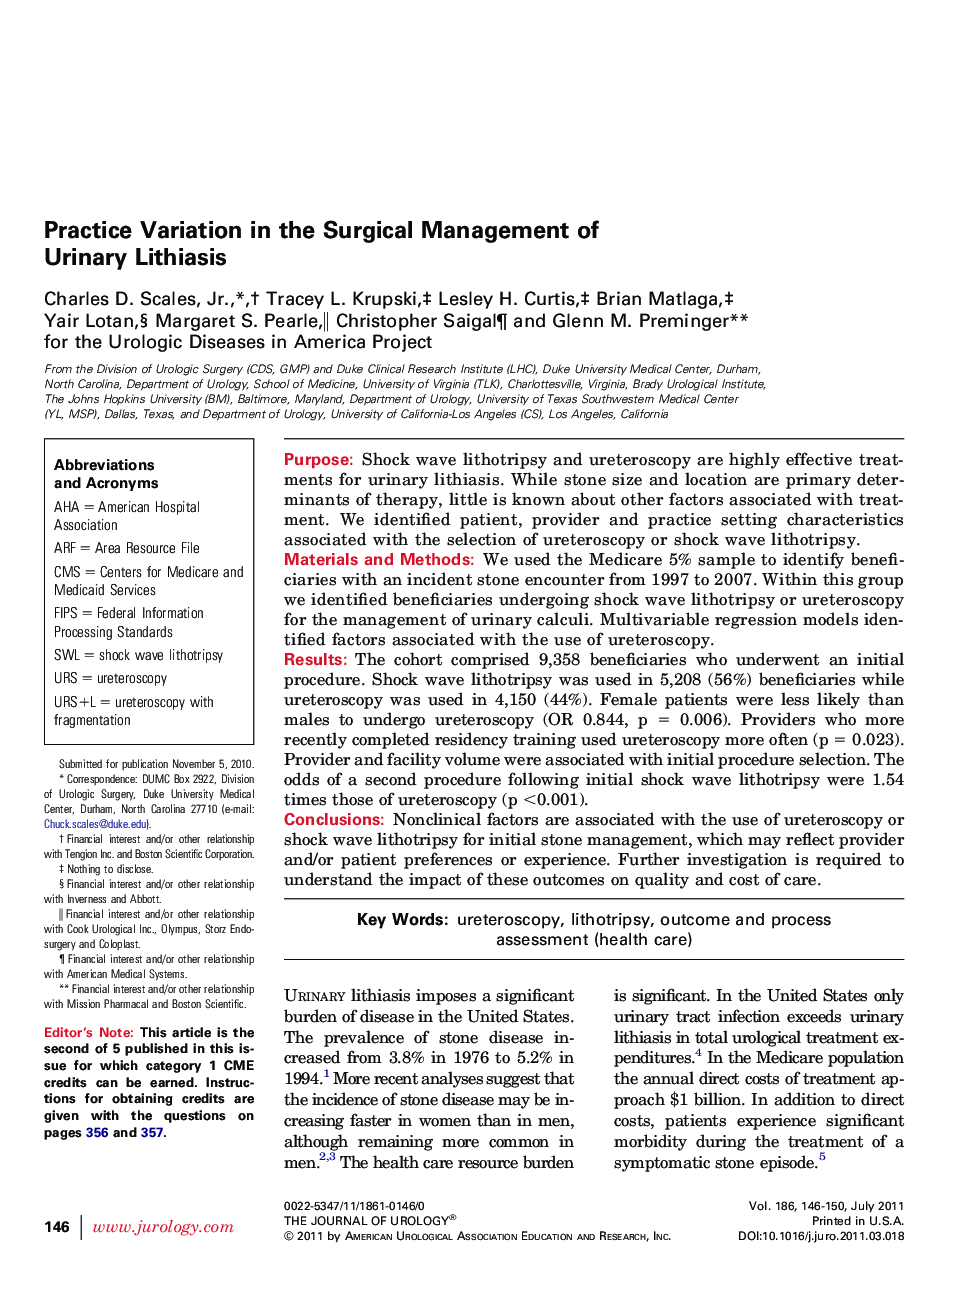 Practice Variation in the Surgical Management of Urinary Lithiasis